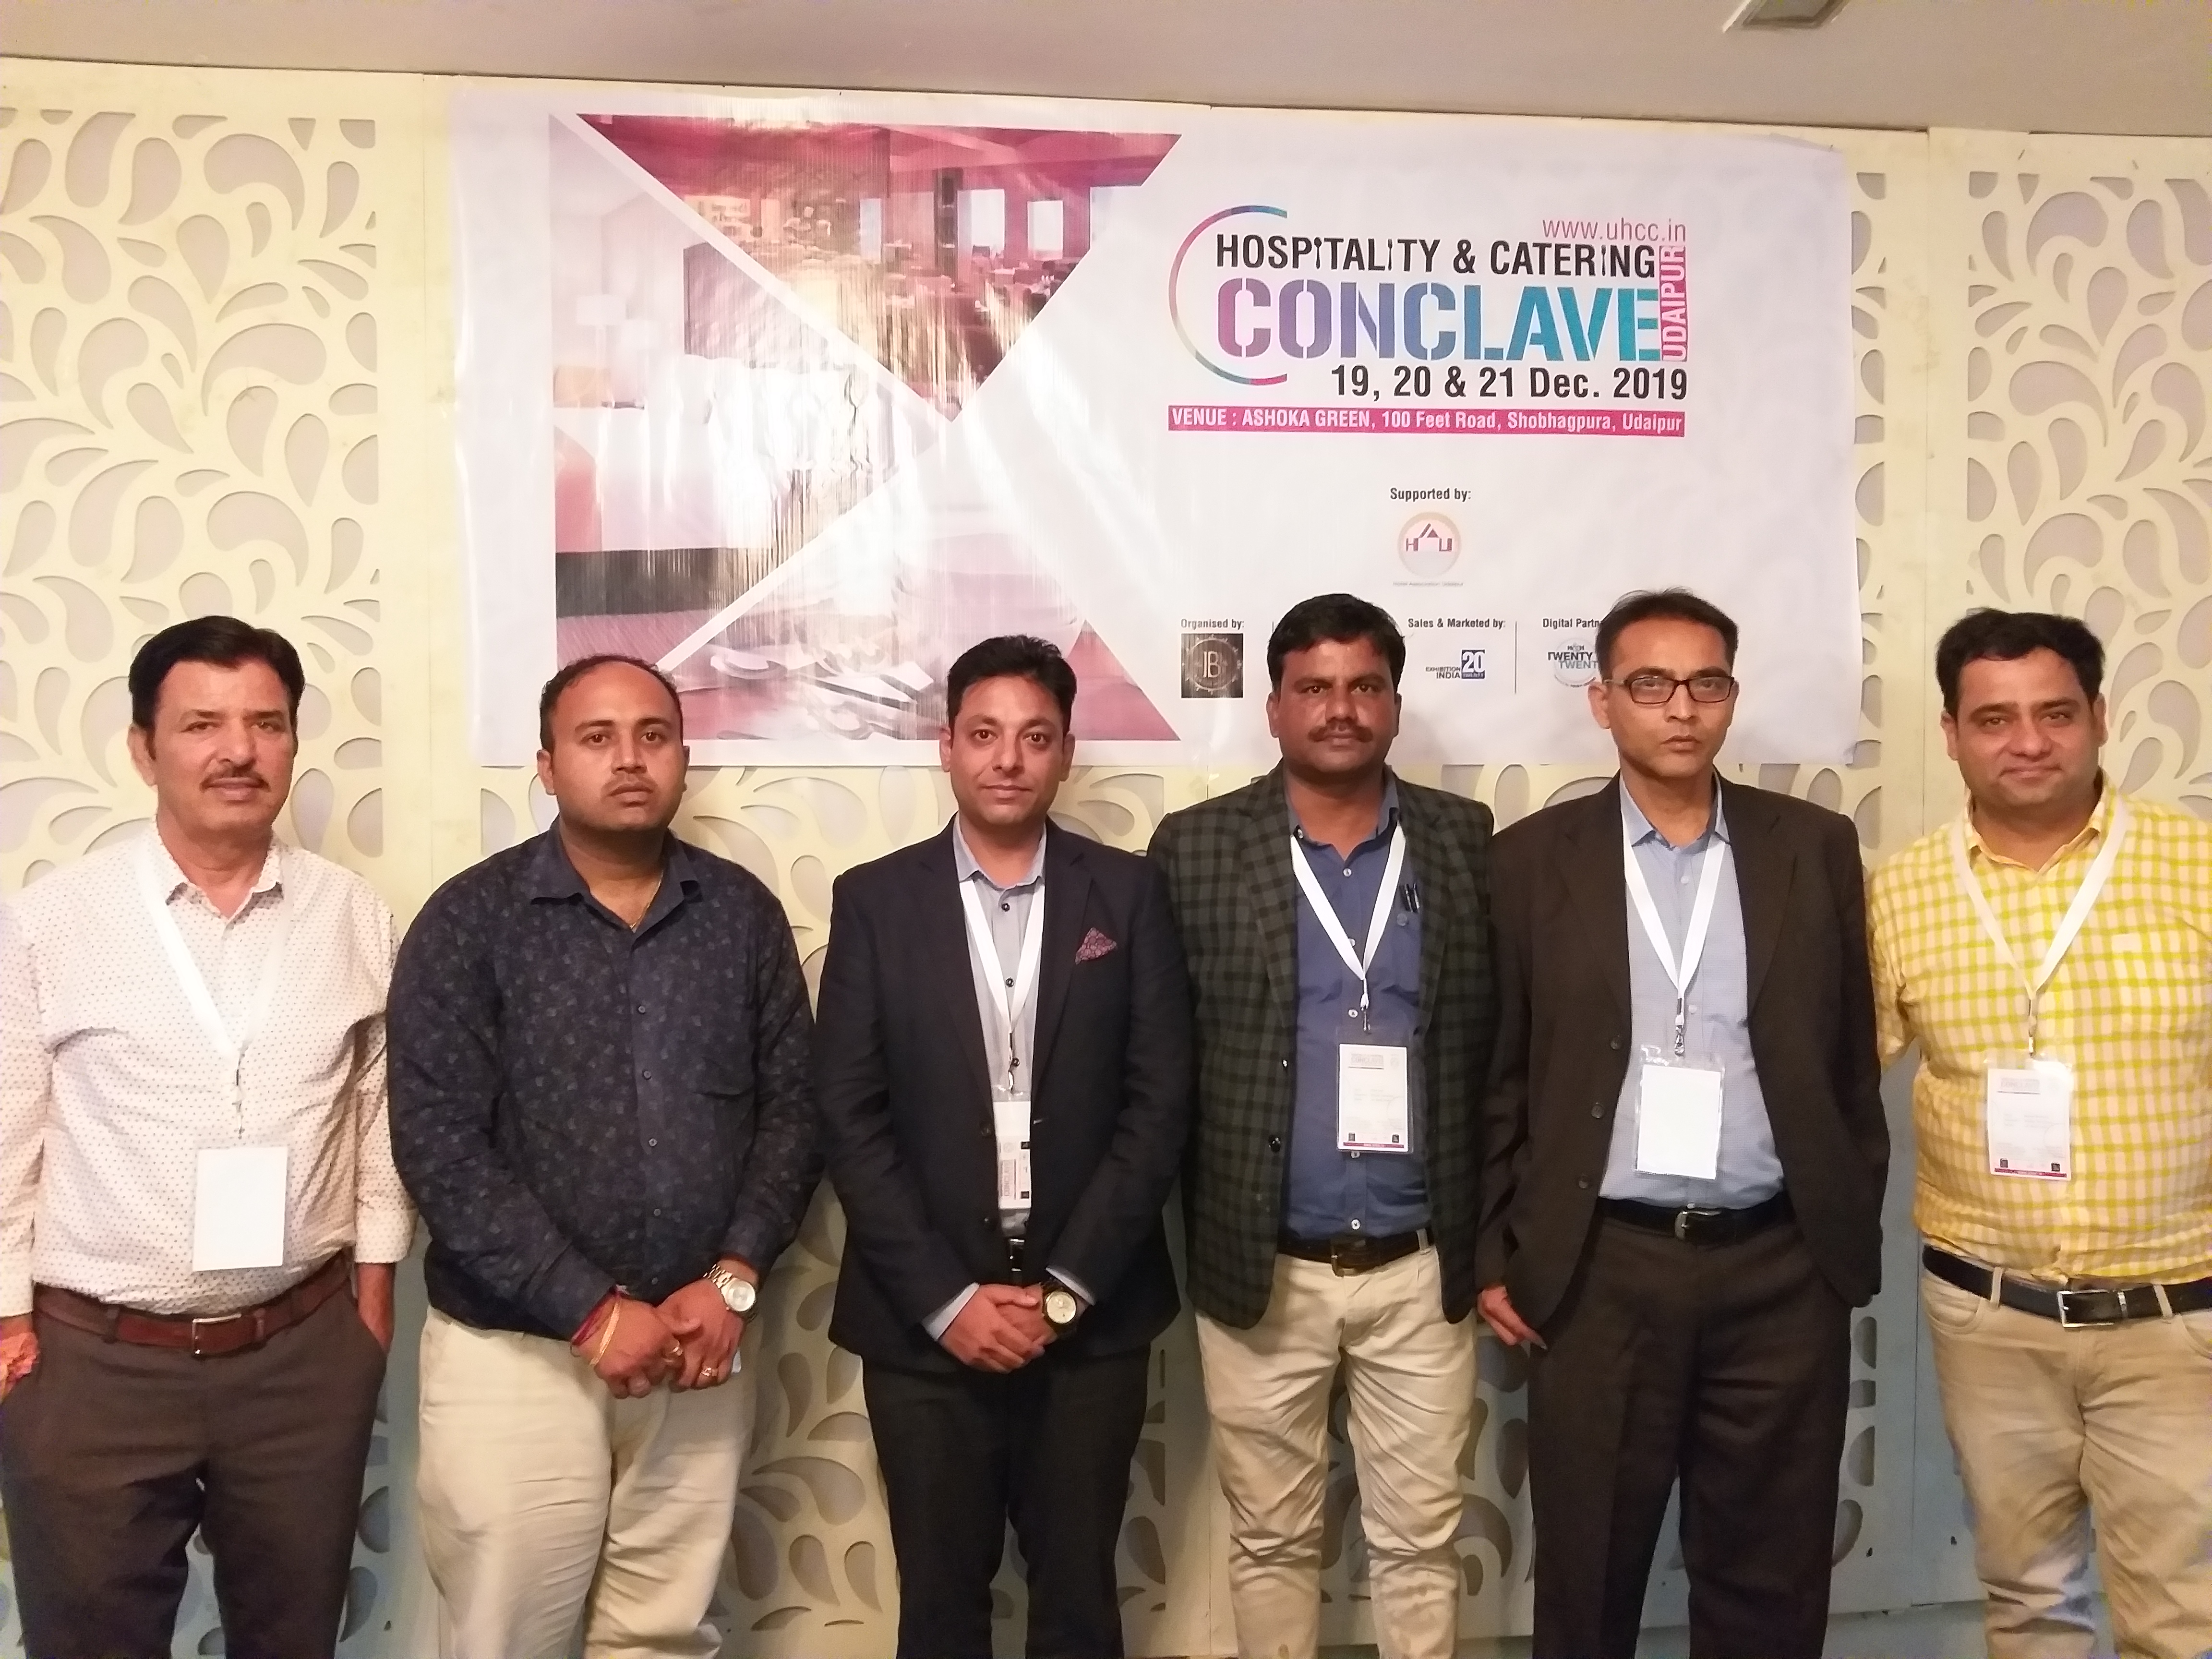 Udaipur Hospitality & Catering Conclave from 19